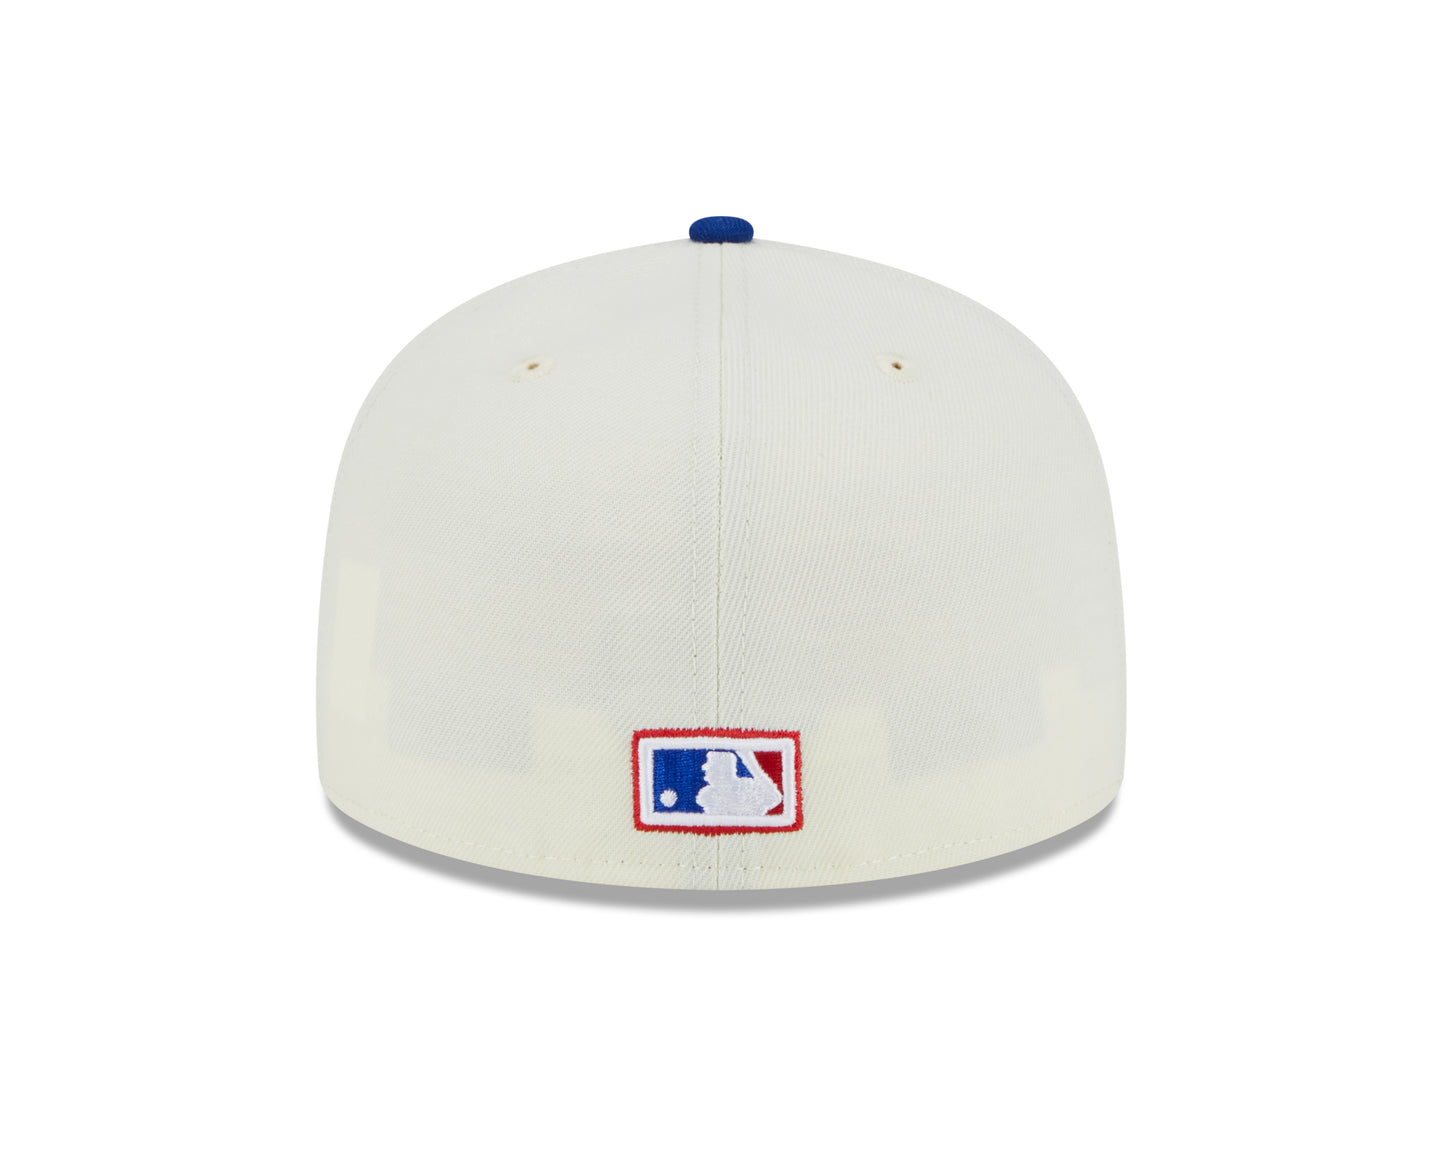 Montreal Expos 1982 All Star Game Cream/Royal New Era Retro 59FIFTY Fitted Hat